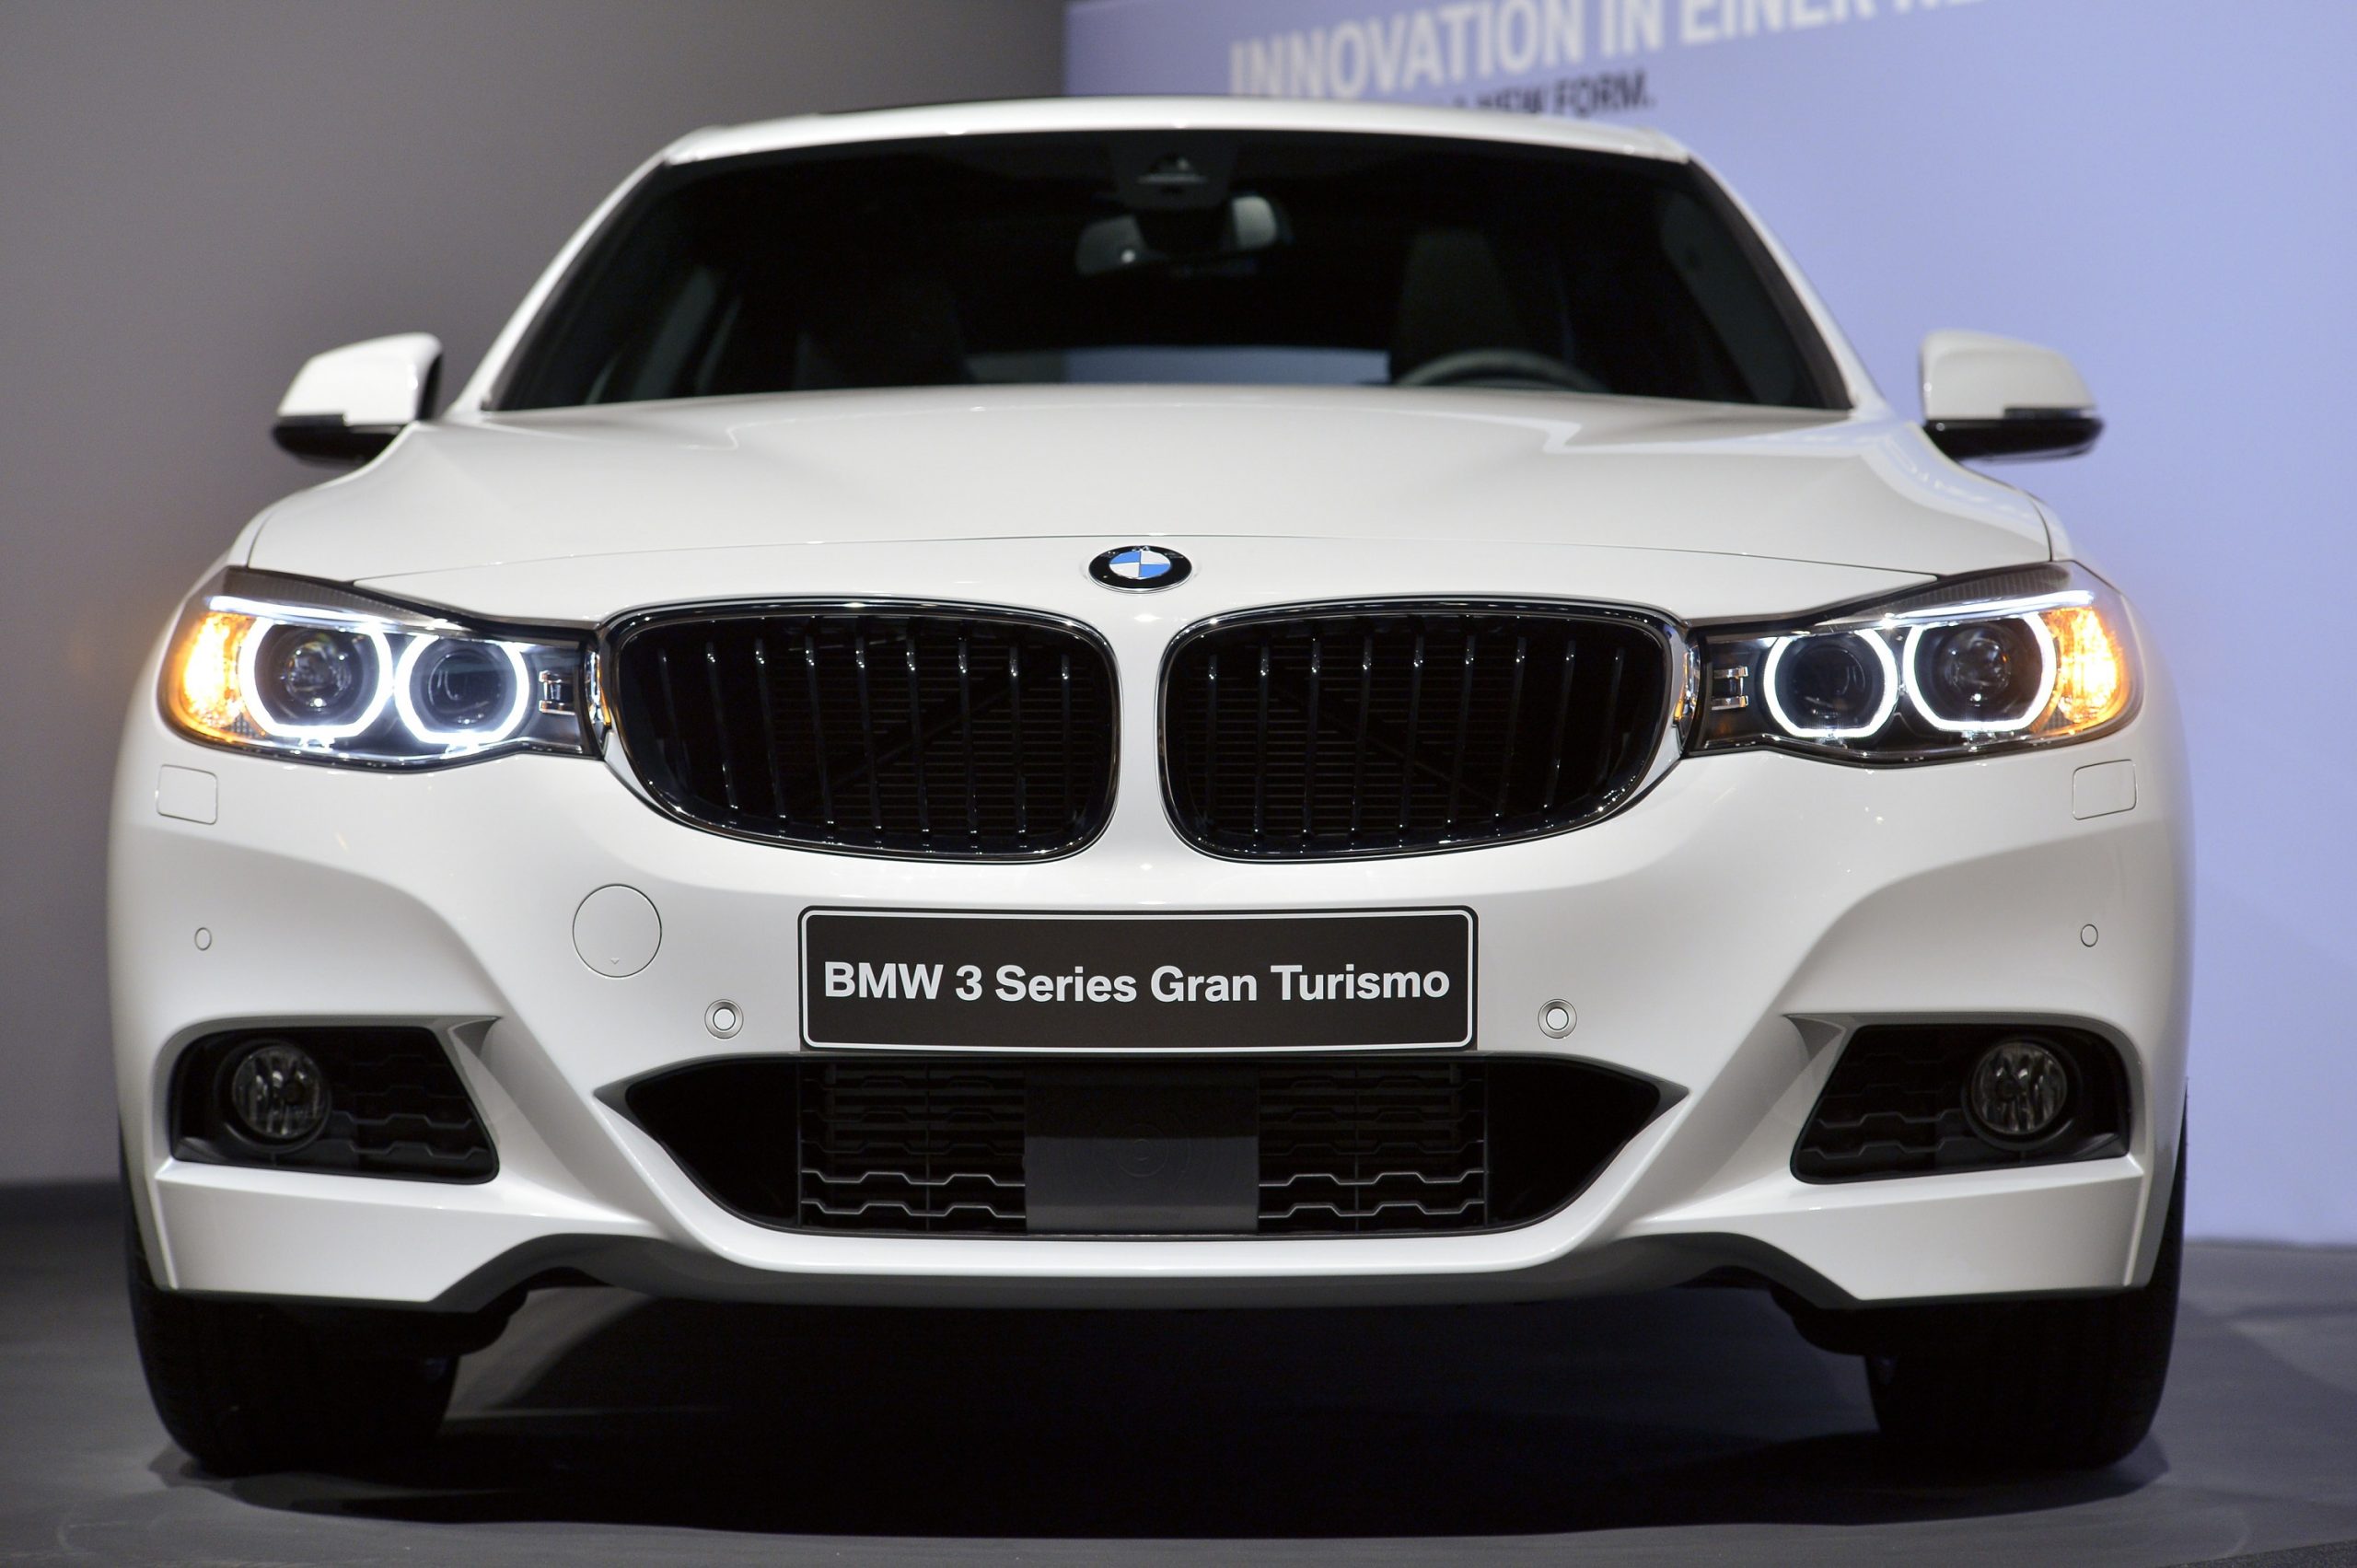 A white 2012 BMW 3 Series, one of the least reliable BMW 3 Series models ever